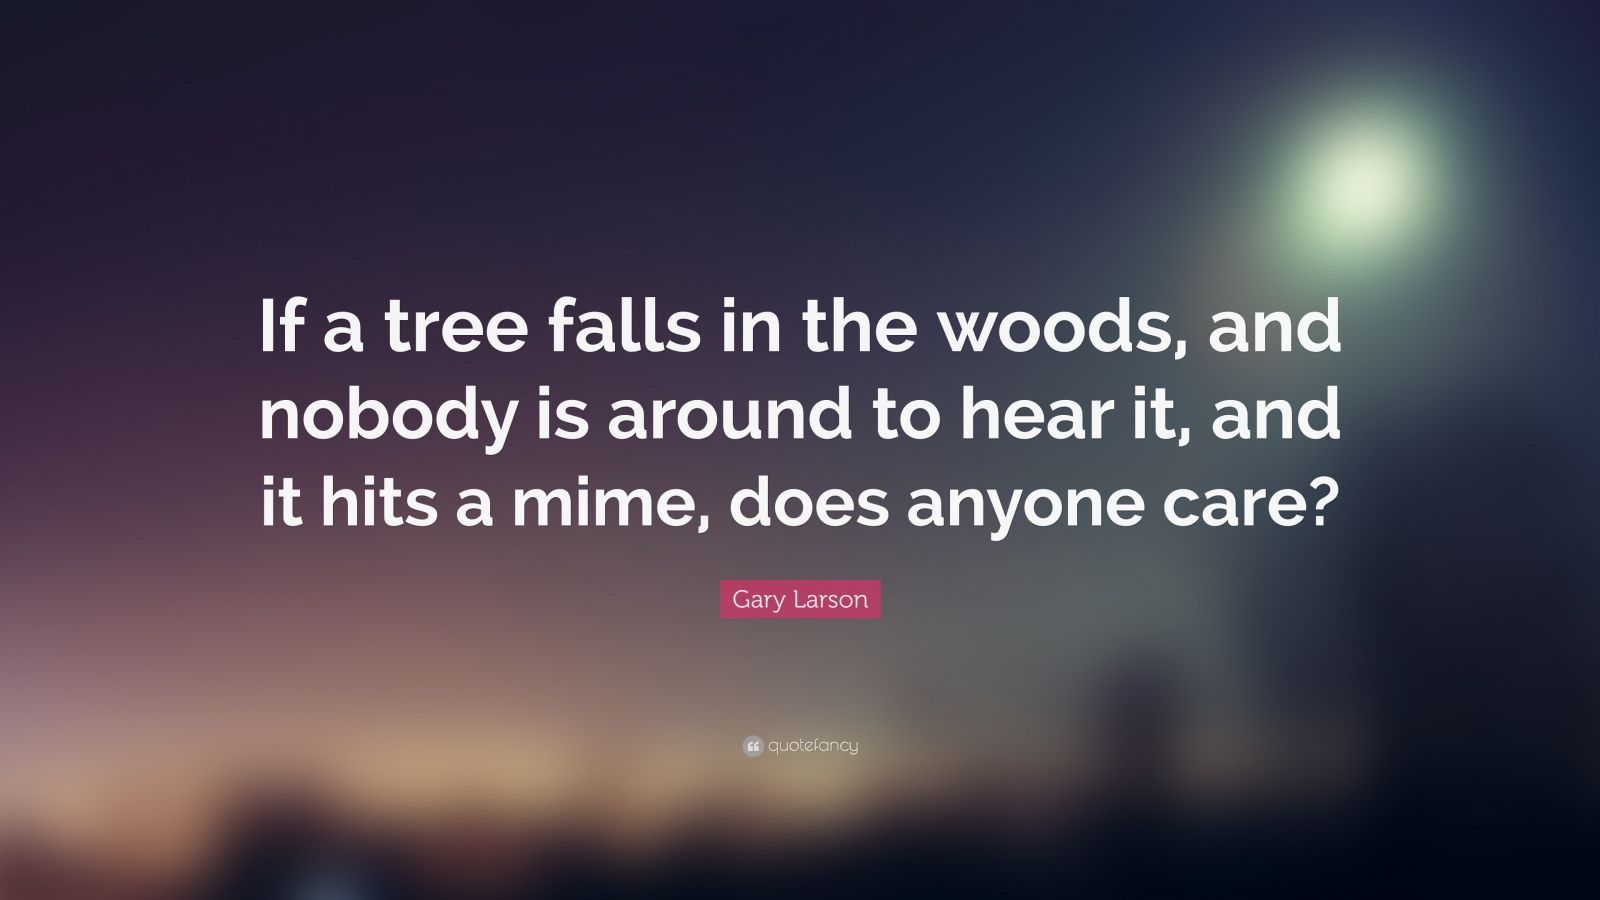 Gary Larson Quote “If a tree falls in the woods, and nobody is around